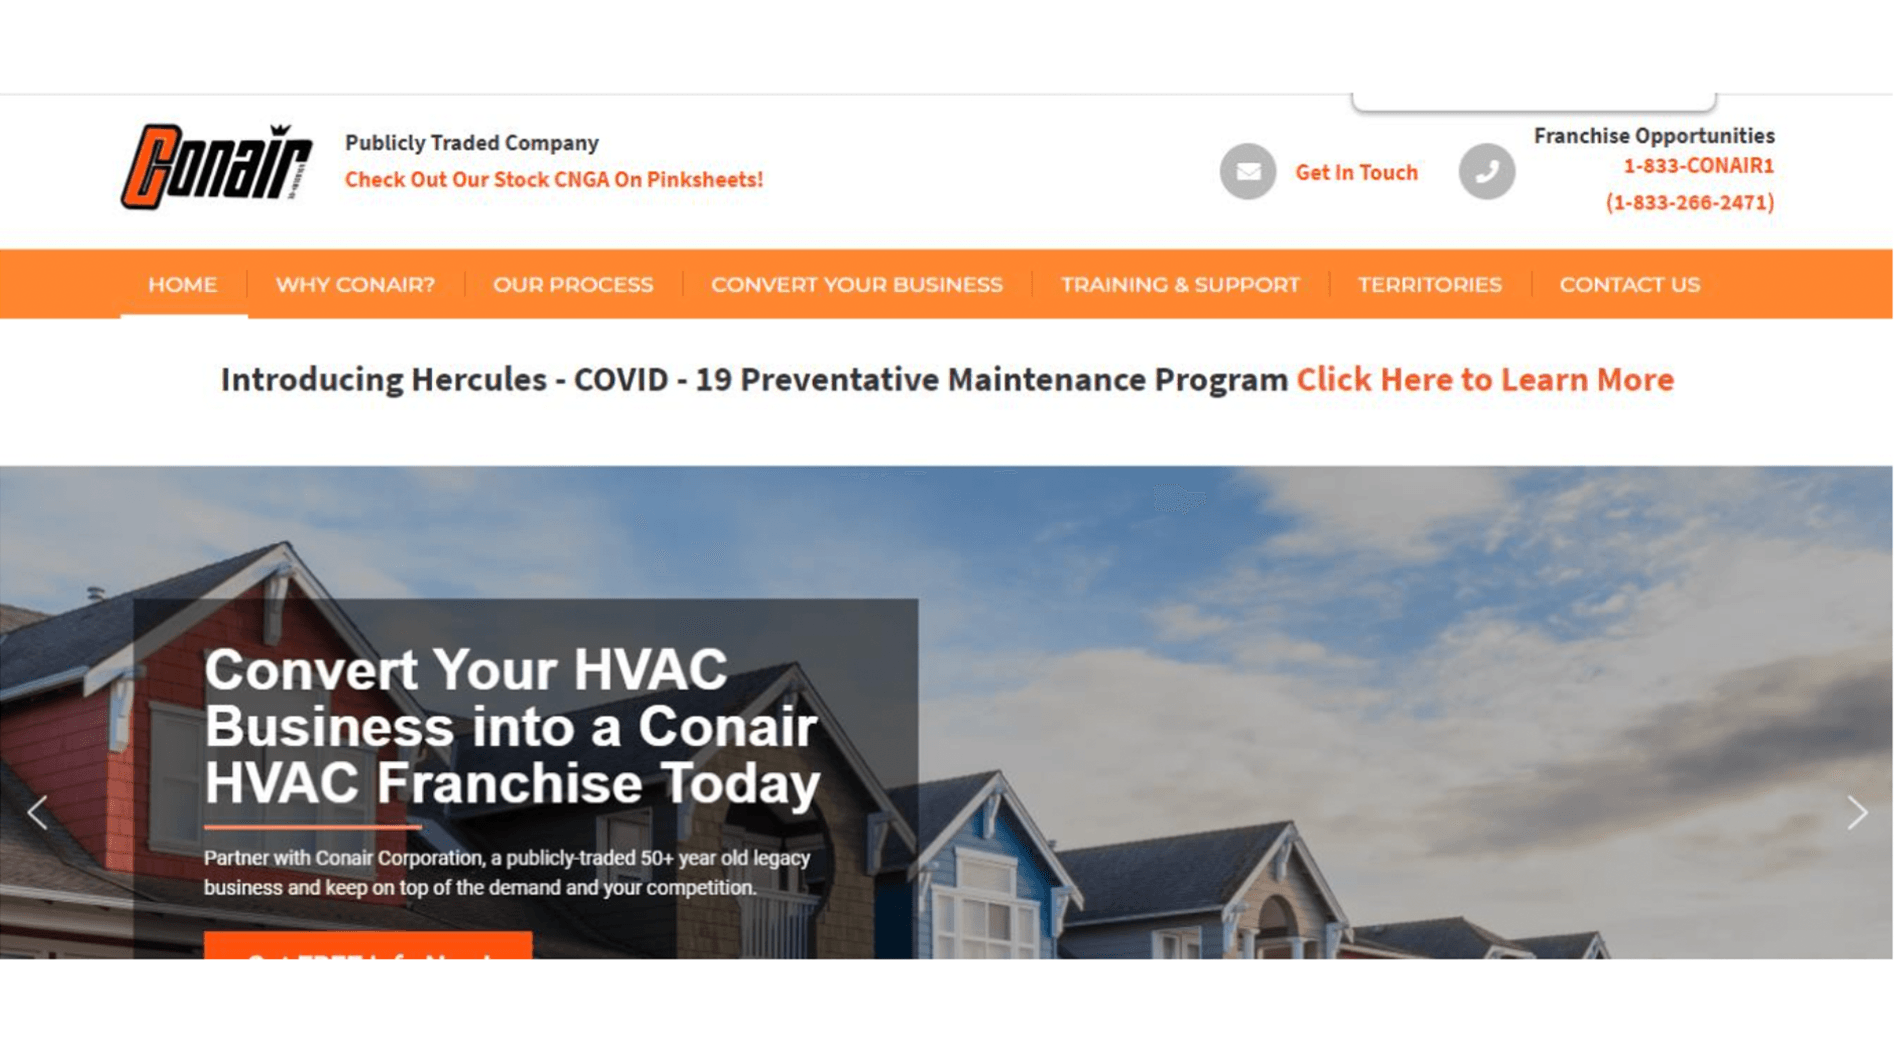 Opening an HVAC franchise is a great opportunity to enter the HVAC industry. Here are some amazing options you can consider if you're looking to enter this industry. 